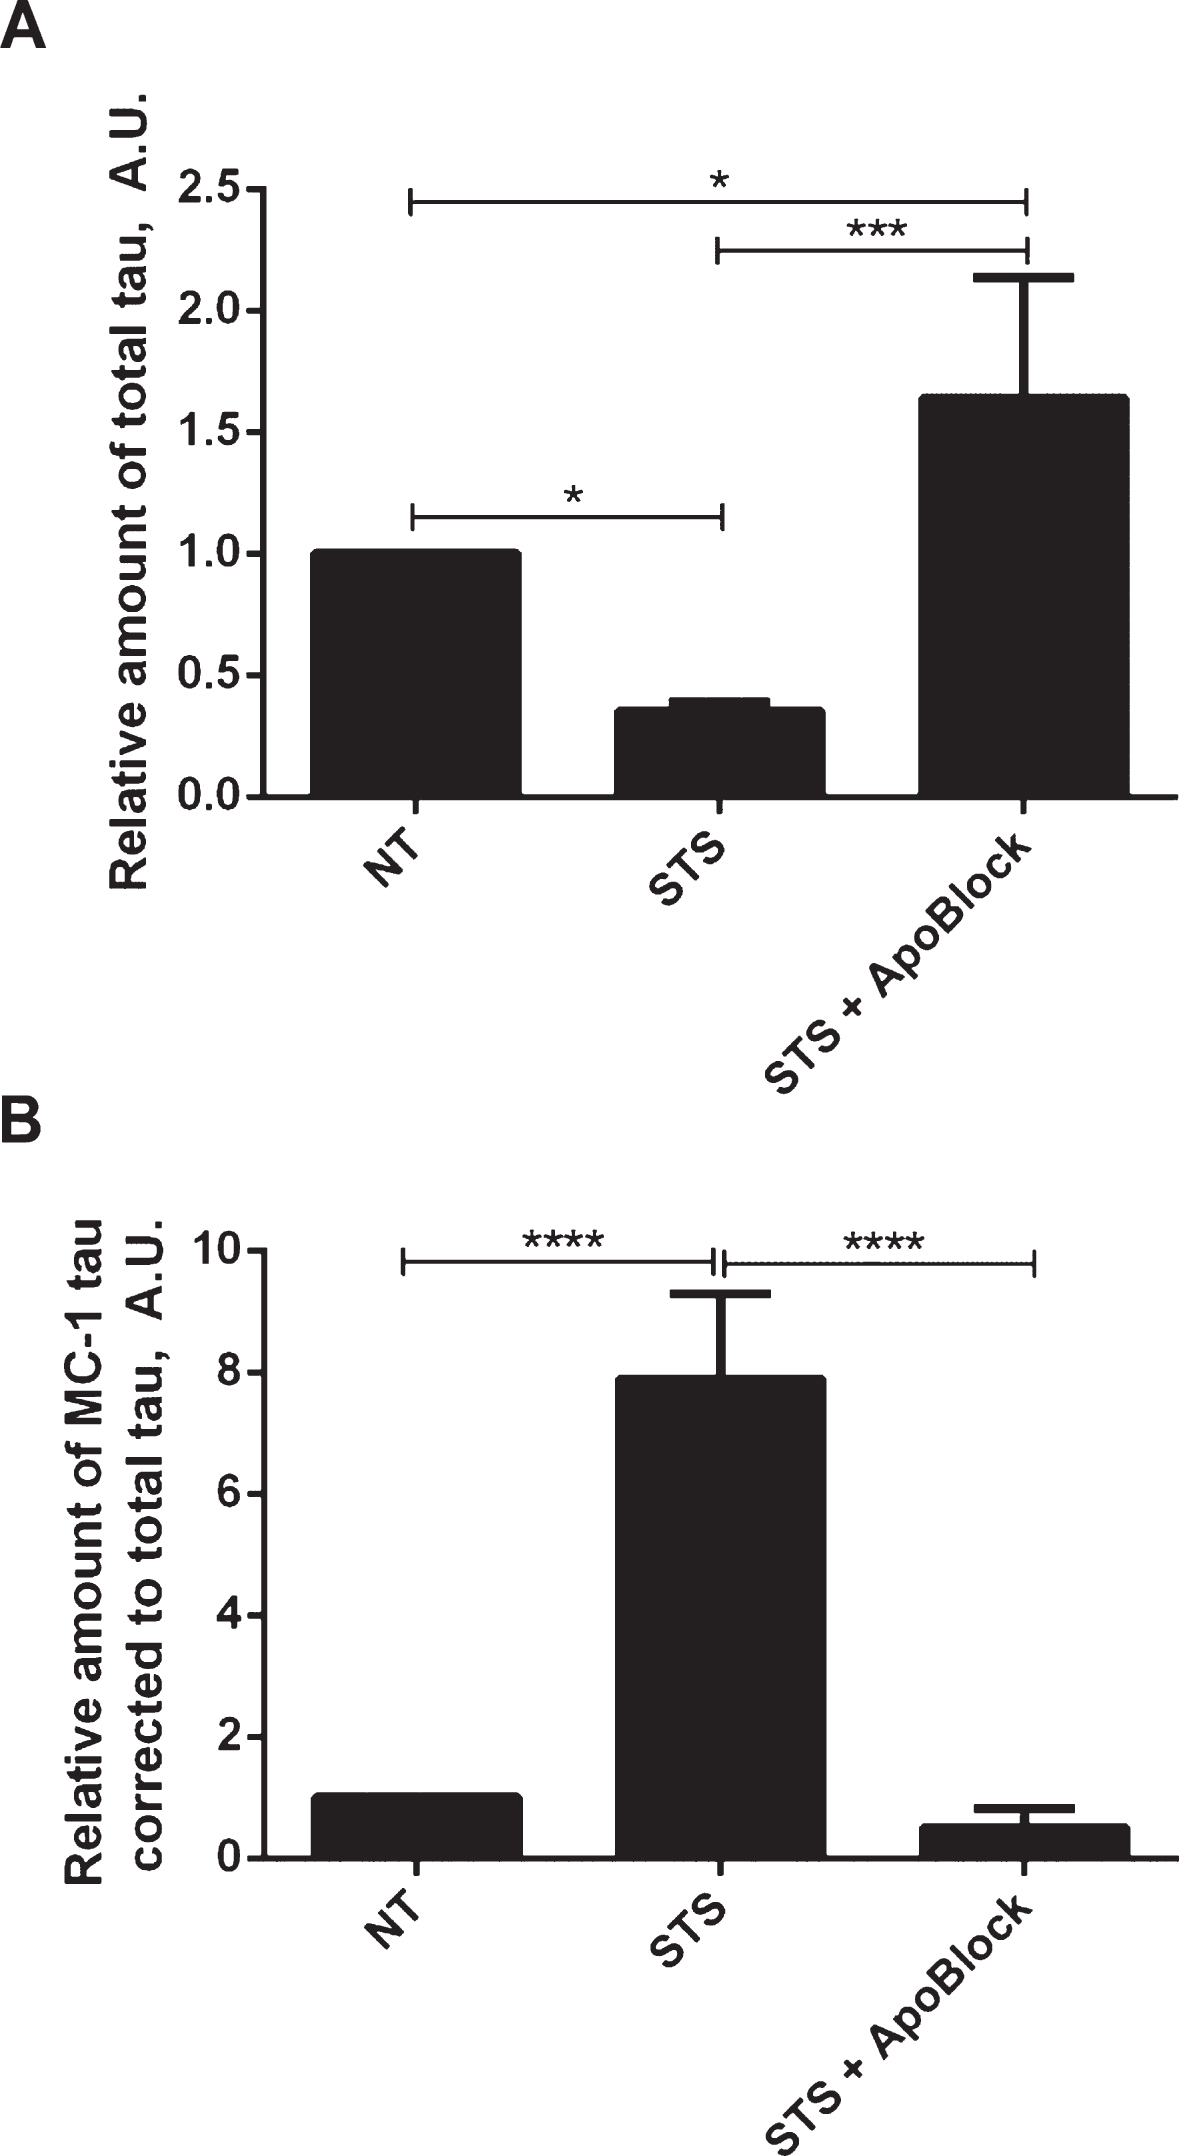 Protective effect of pan-caspase inhibitor on aggregation of tau. N2a cells were transiently transfected with 2N4R tau and treated with 0.5μM staurosporine (STS) or staurosporine and 50μM pan-caspase inhibitor (ApoBlock) for 24 h. Untreated controls are shown as NT. Cell lysates were analyzed in ELISA for total tau (A) and conformationally-changed MC1-tau (B). Linear regression with variable slope analyses were used to calculate relative amounts of total tau and conformationally-changed tau from standard curves based on purified PHFs. Relative amounts of conformationally-changed were corrected for total tau. Amounts of total tau and conformationally-changed tau are expressed as mean values of six individual datasets relative to untreated controls set to unity. Statistical analyses for the relative amounts of total tau and D421-tau using one-way ANOVA with multiple comparisons. A.U. arbitrary units.